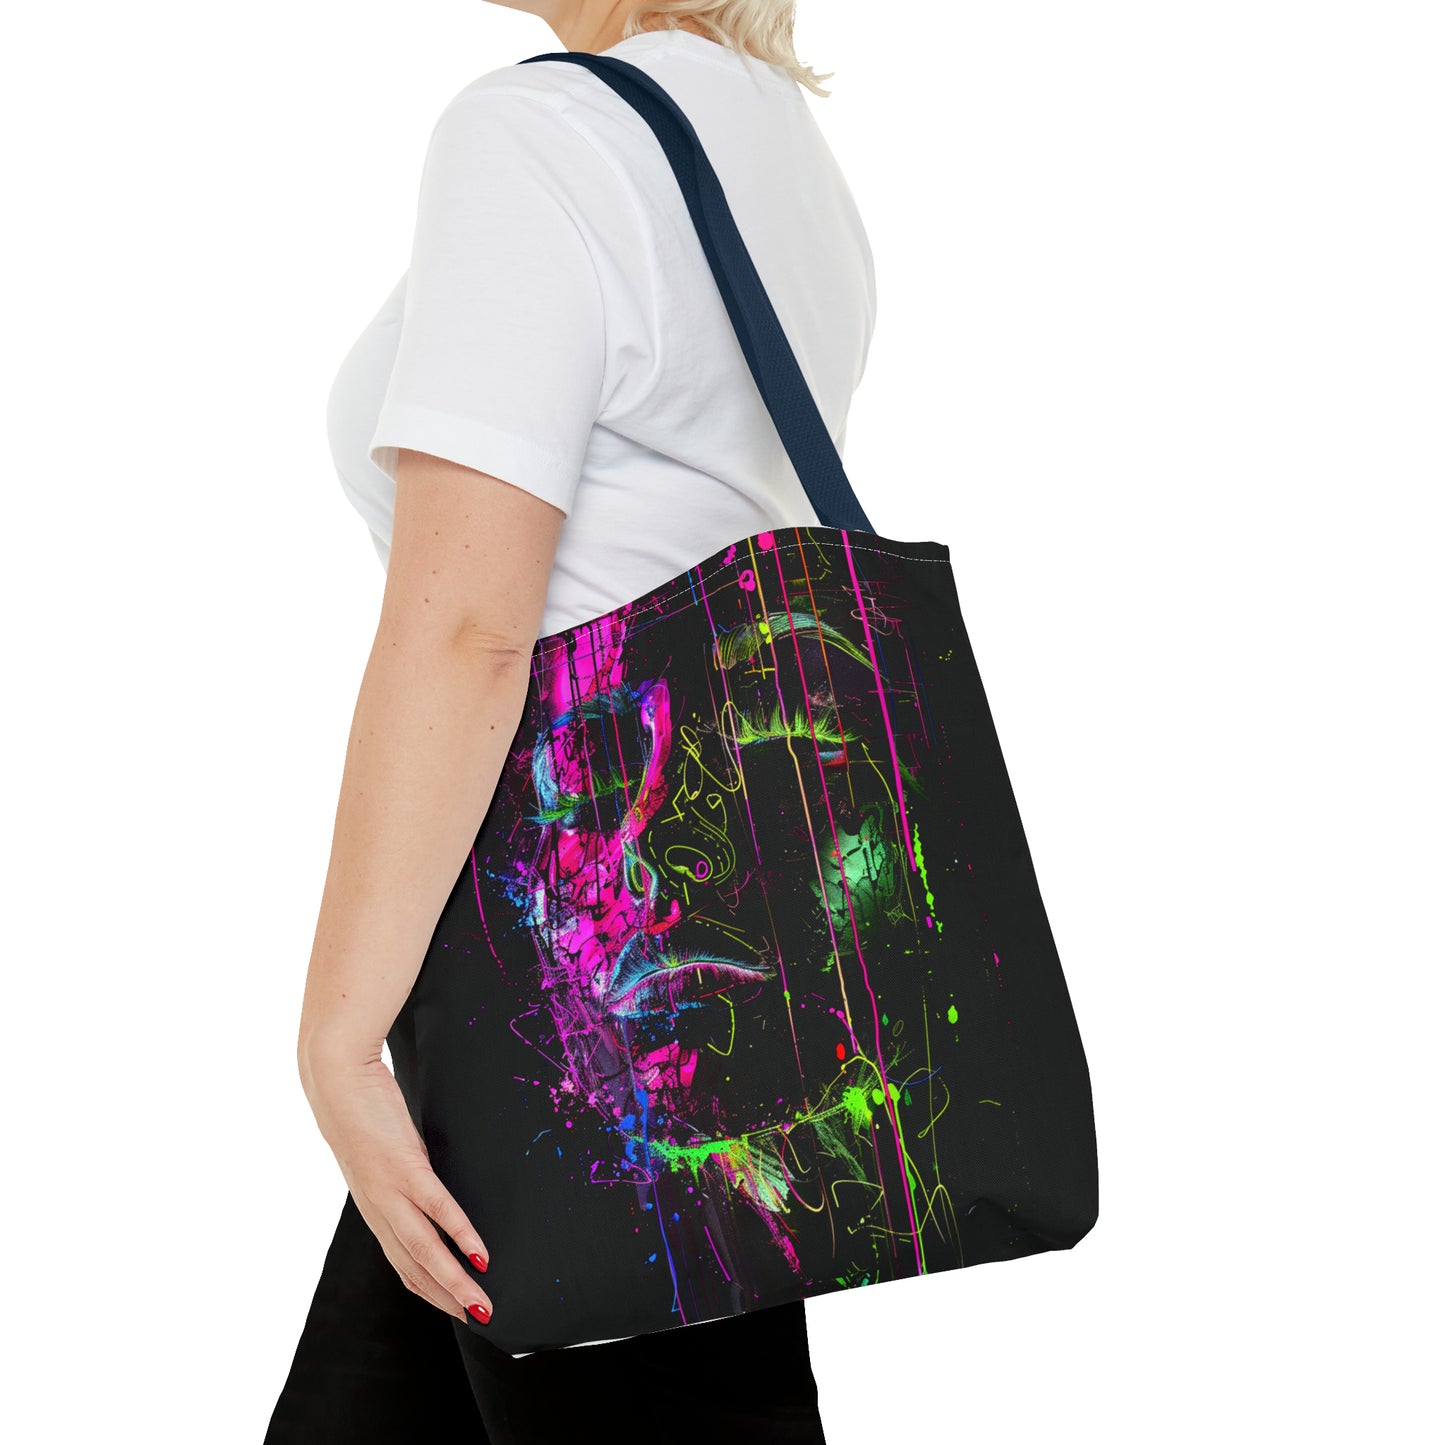 The Muse| Thoughts| Color-Dripping Ink |Portrait of a Woman| Tote Bag